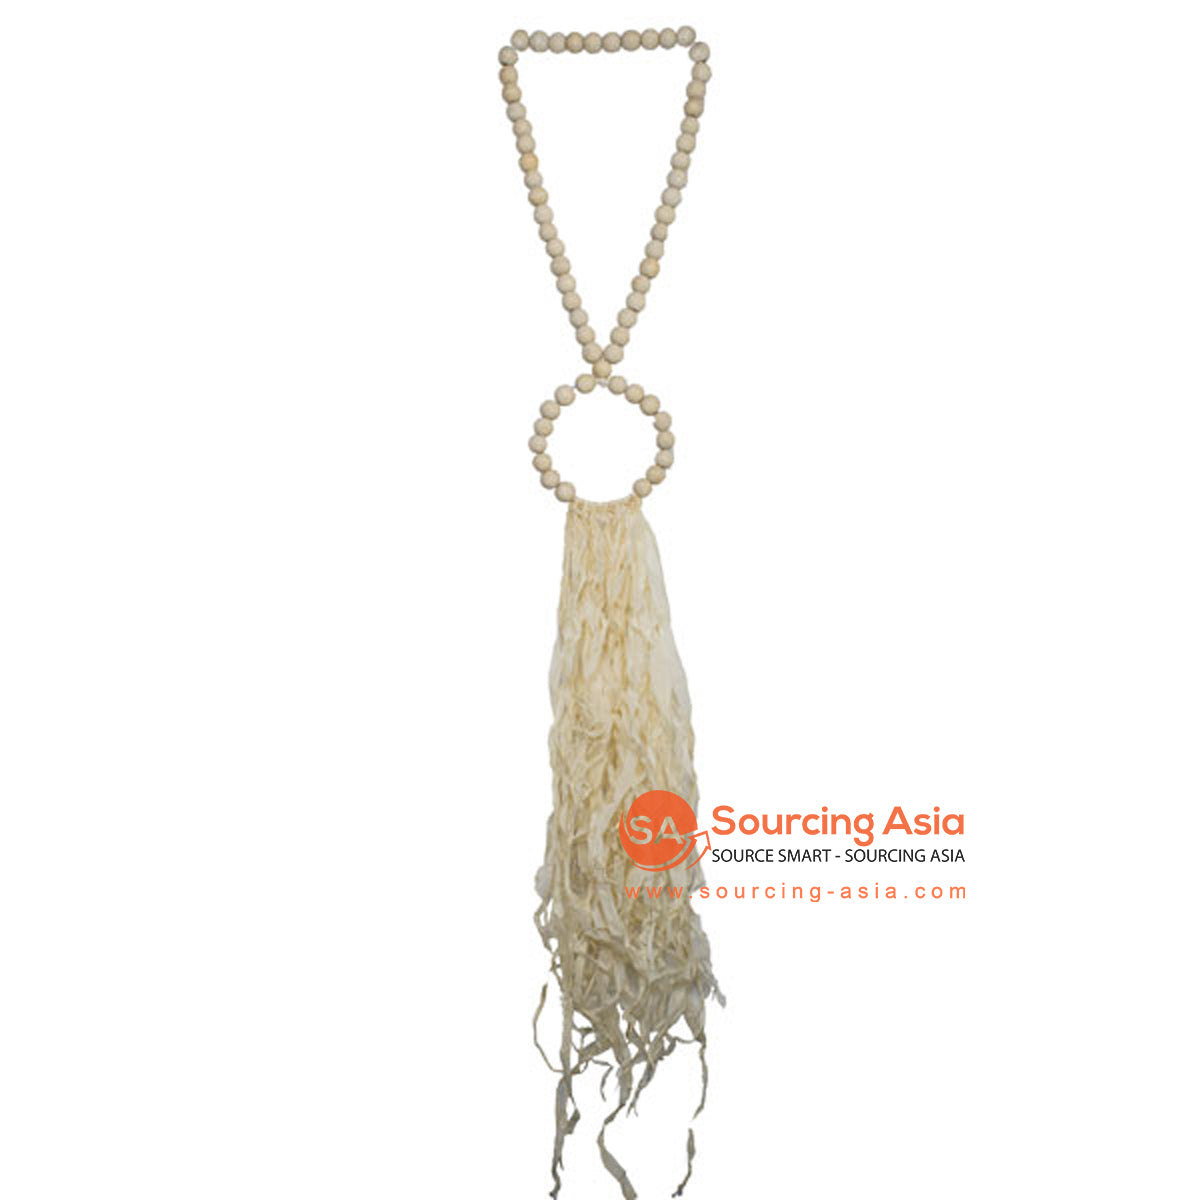 SHL169-14 NATURAL TIMBER BEADS NECKLACE WITH RAFFIA FRINGE HANGING WALL DECORATION